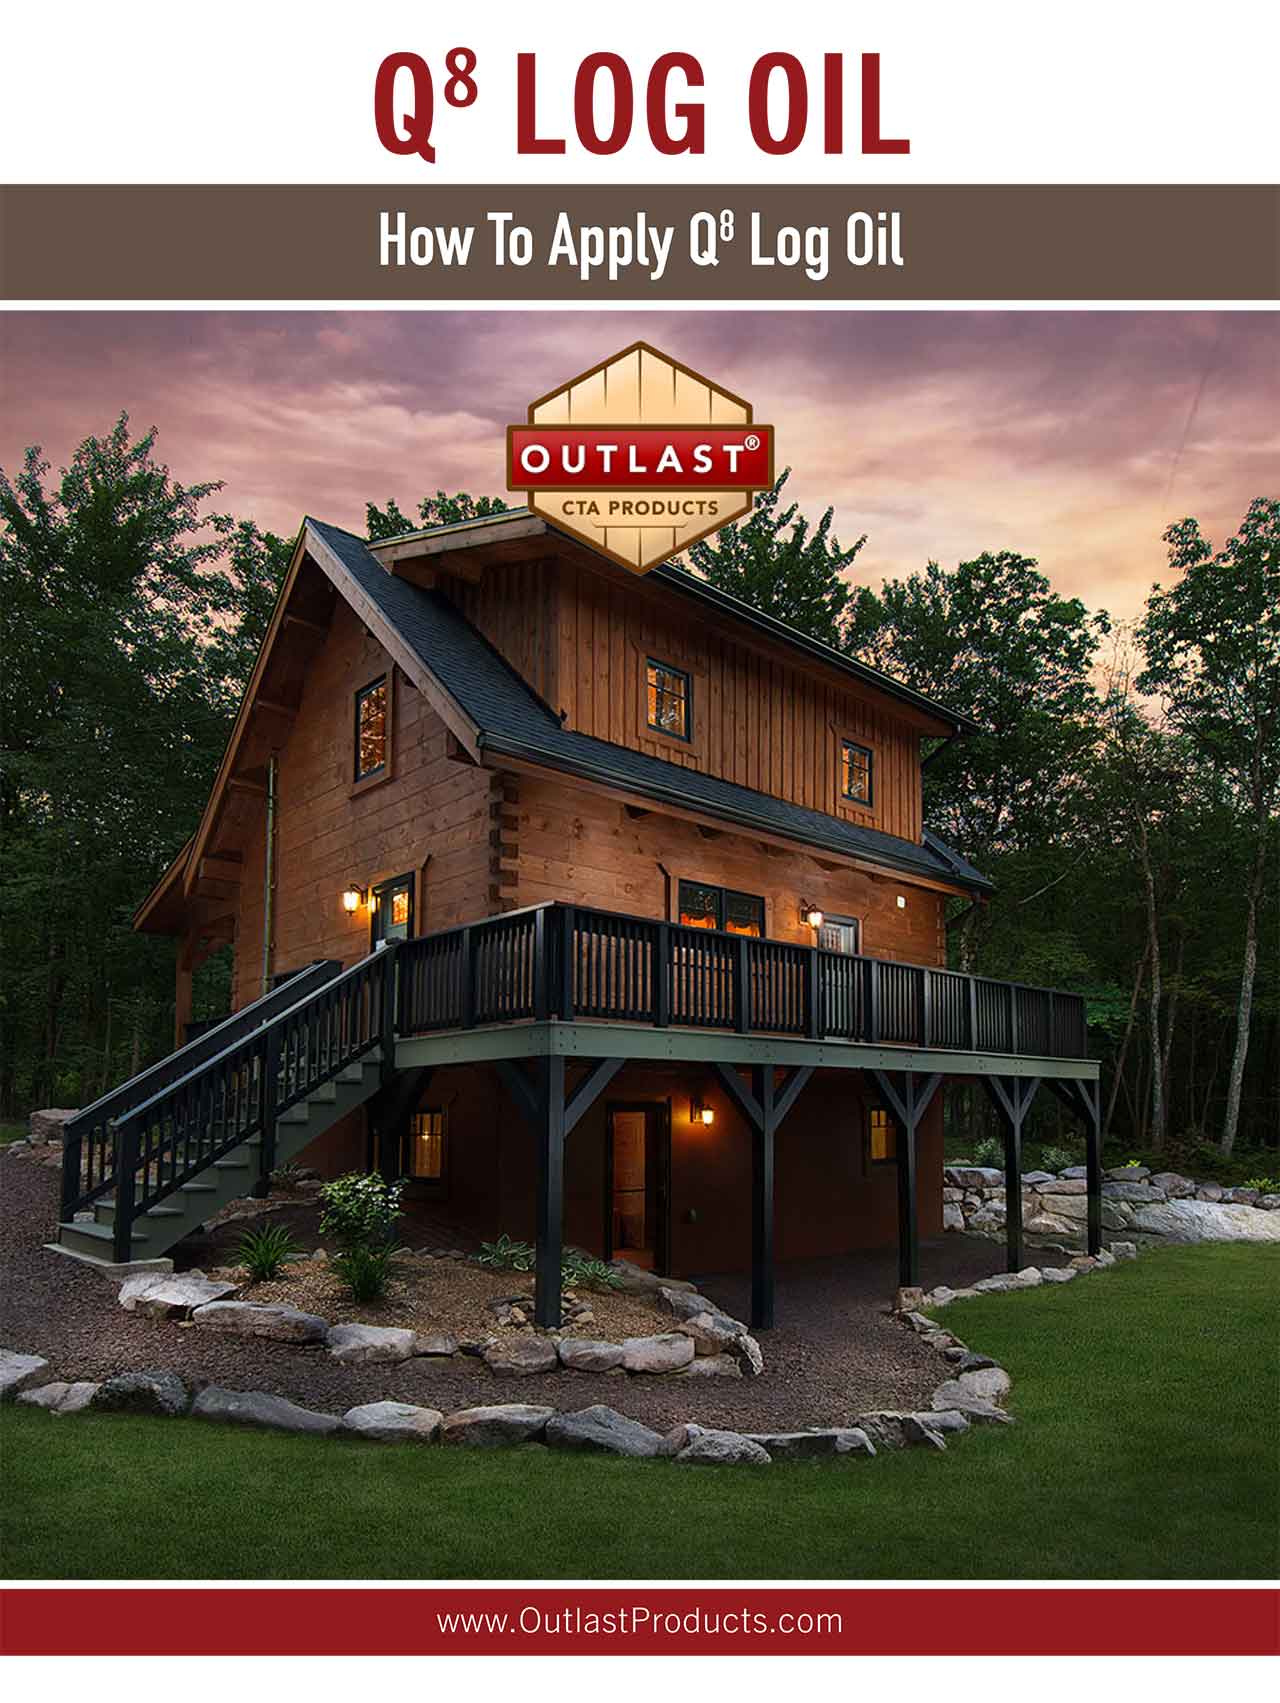 How to Apply Q8 Log Oil Outlast CTA Products eBook red